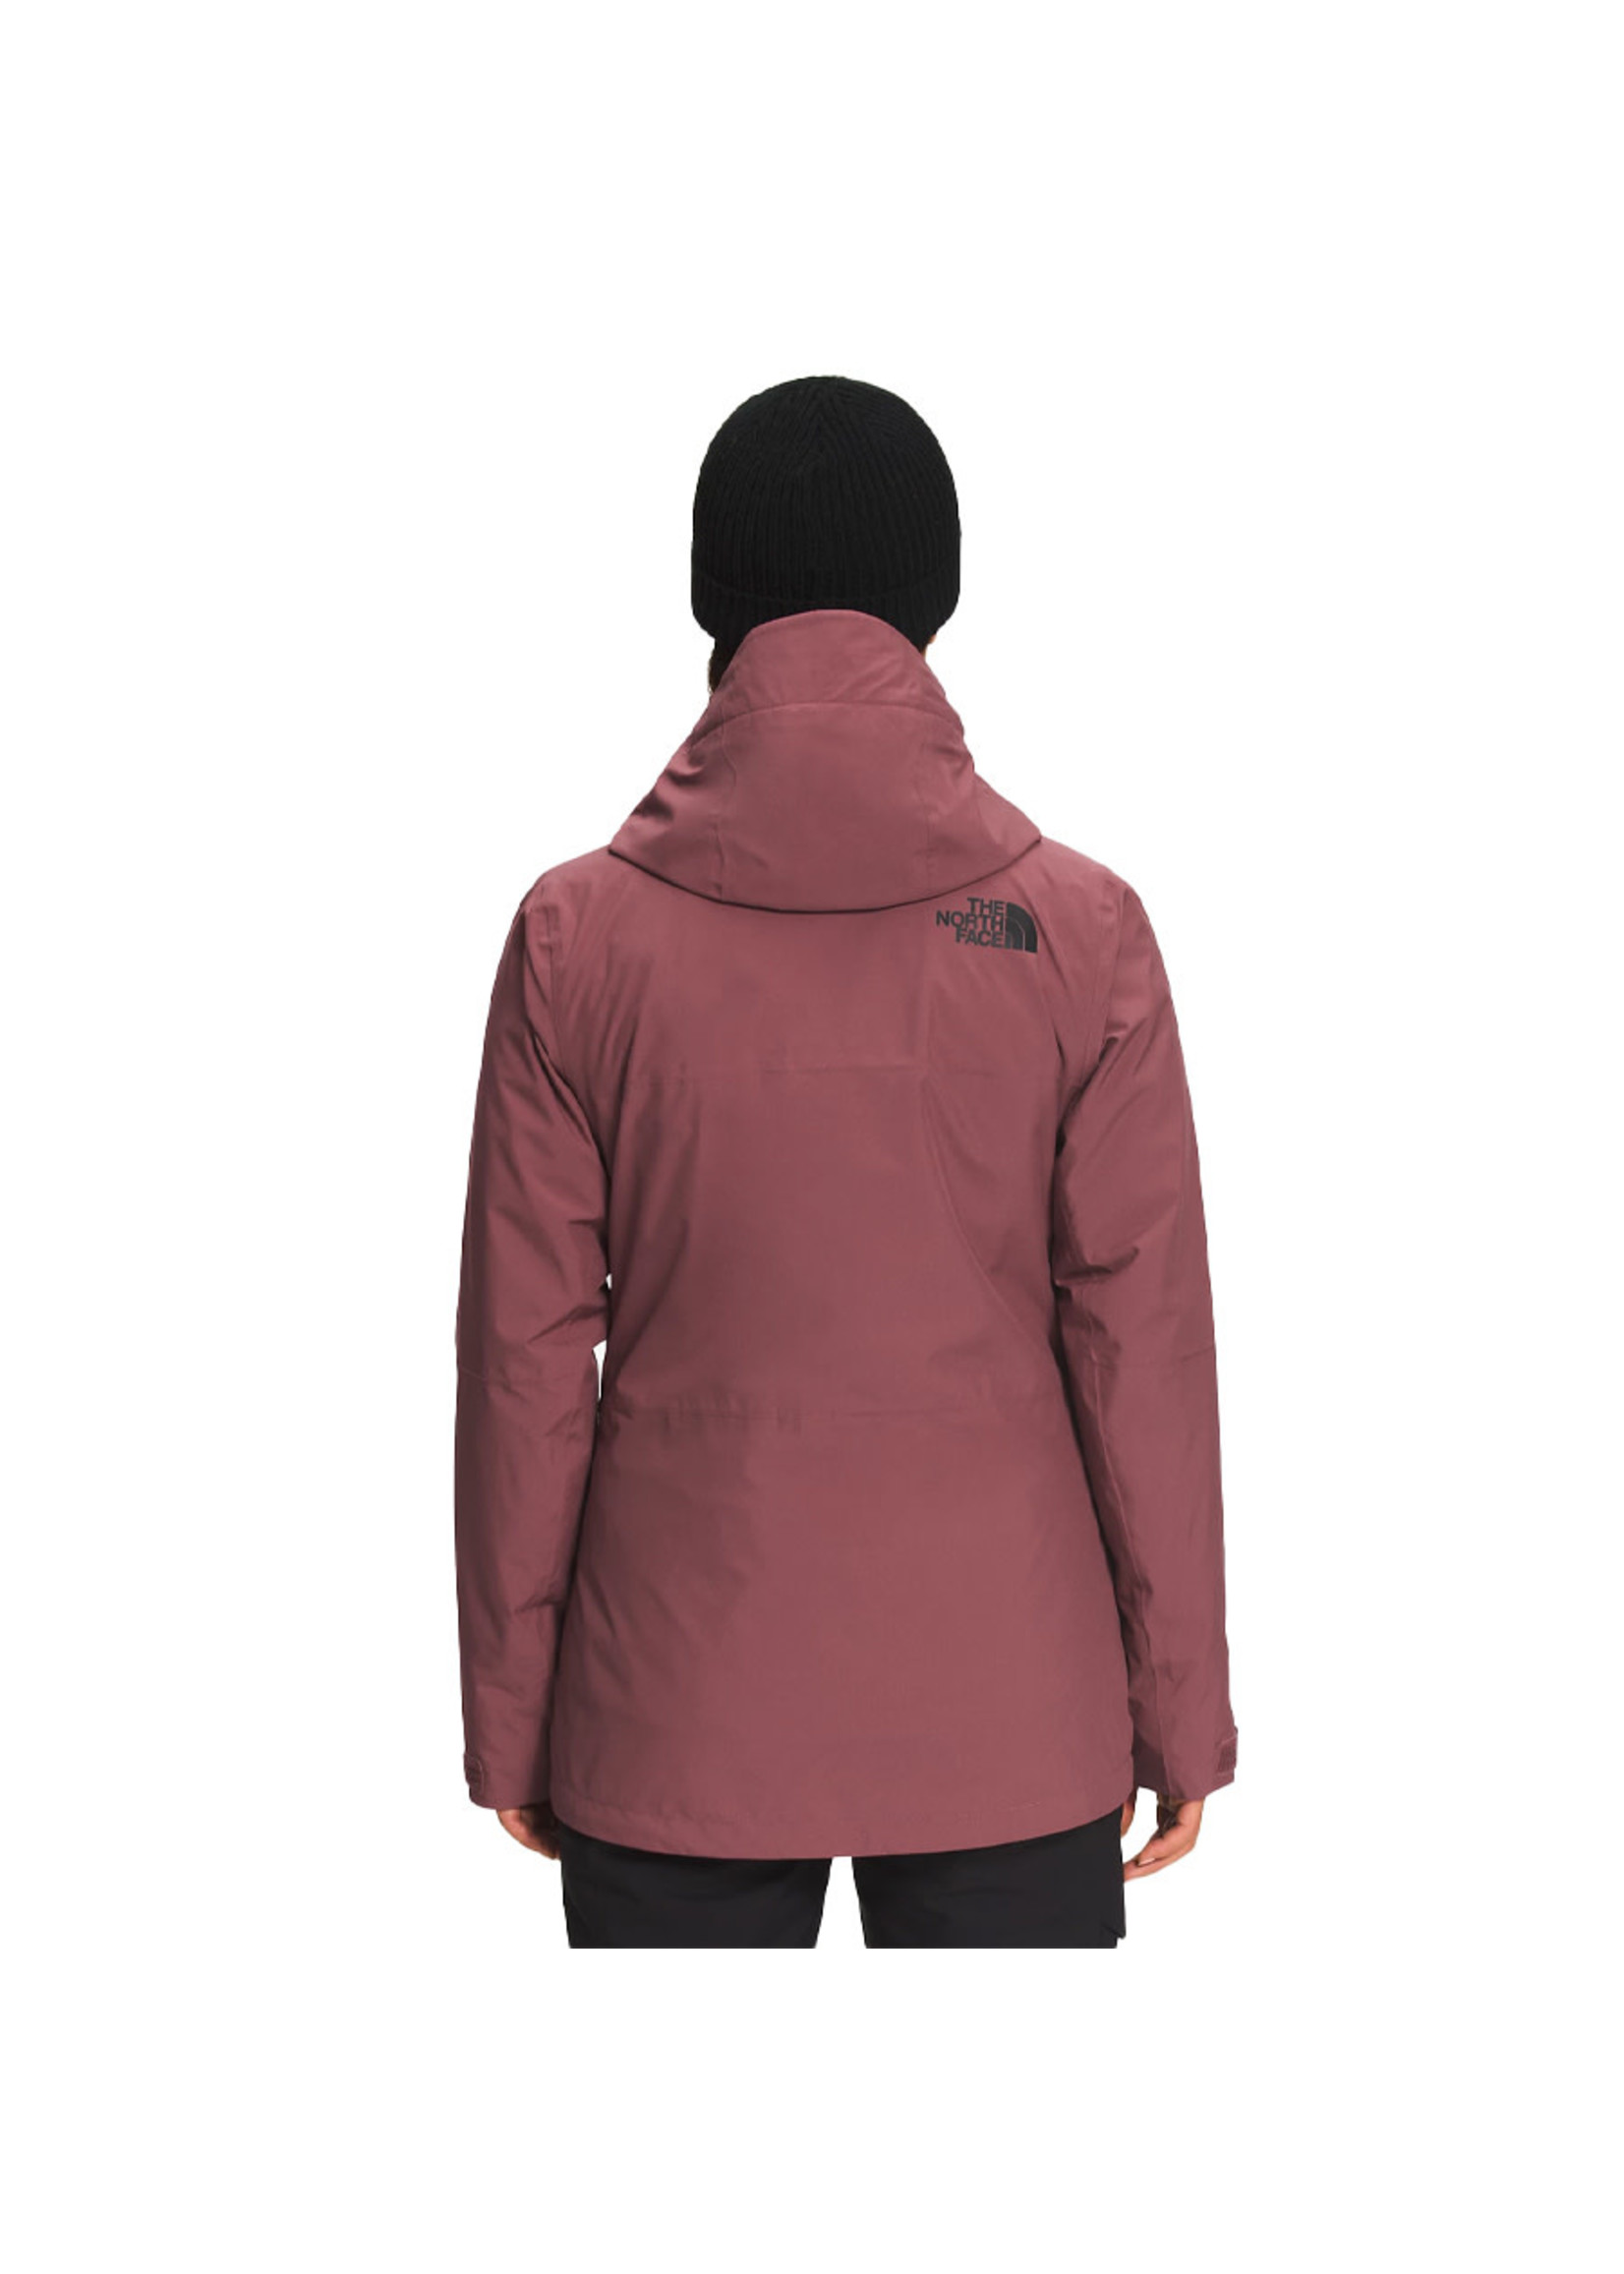 THE NORTH FACE Manteau Thermoball eco snow triclimate